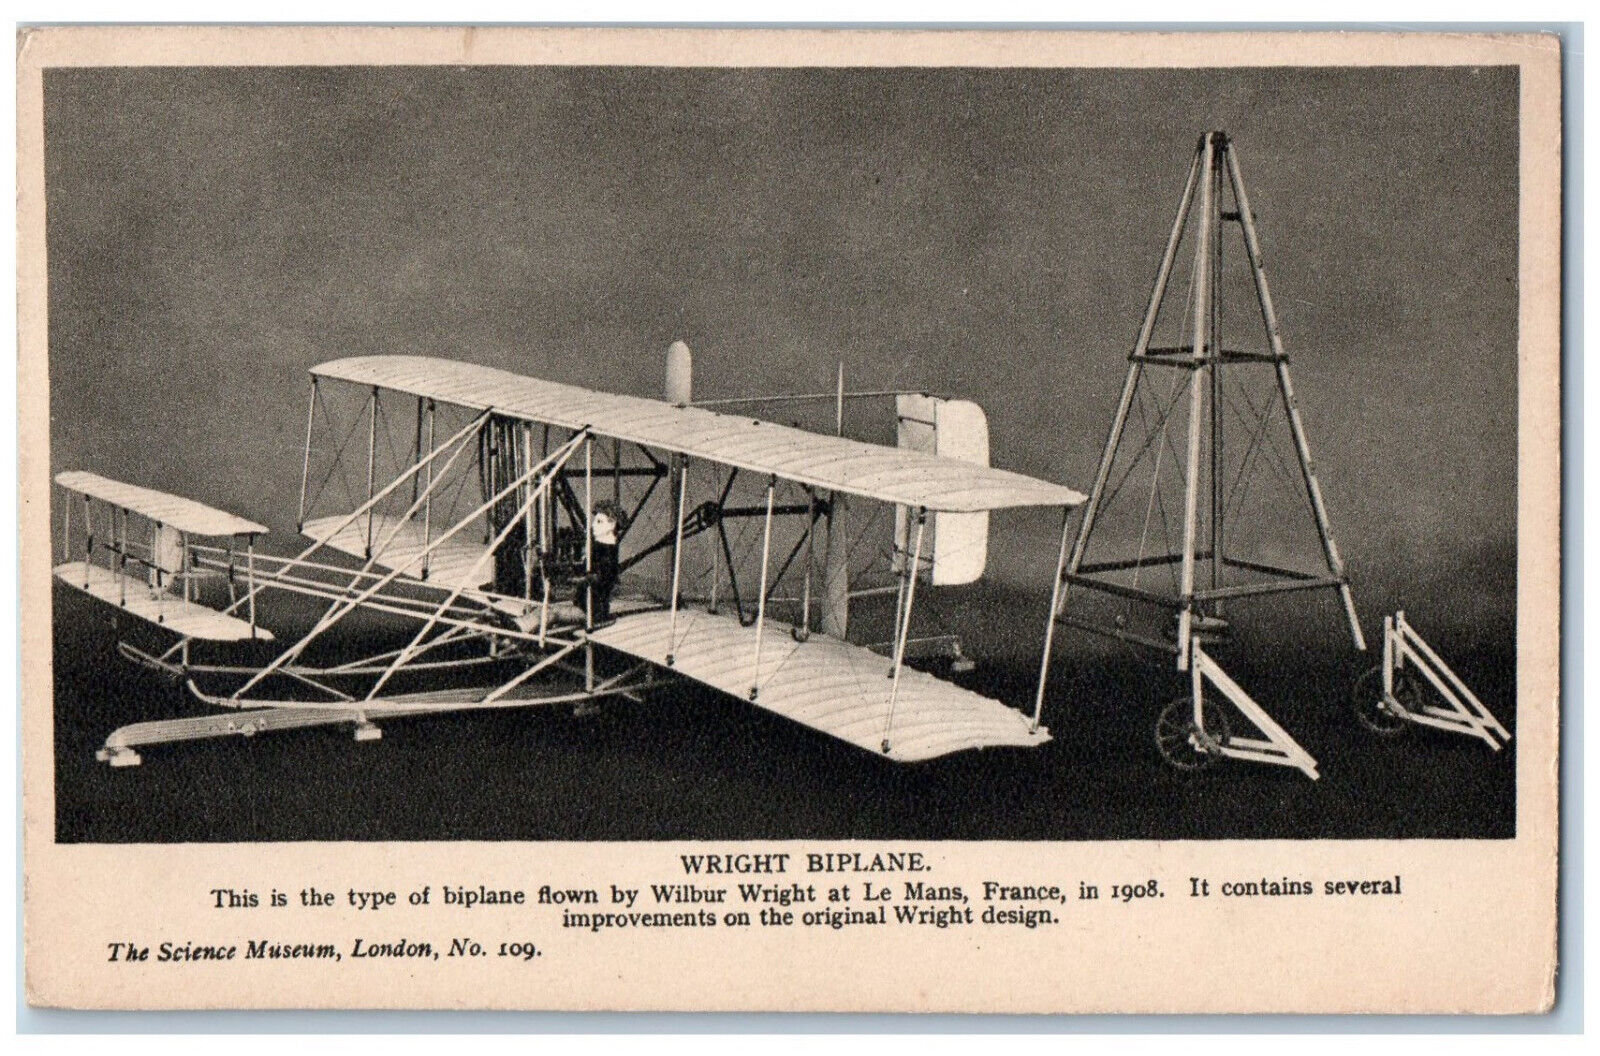 Le Mans France Postcard Wright Biplane Flown By Wilbur Wright c1910 Unposted